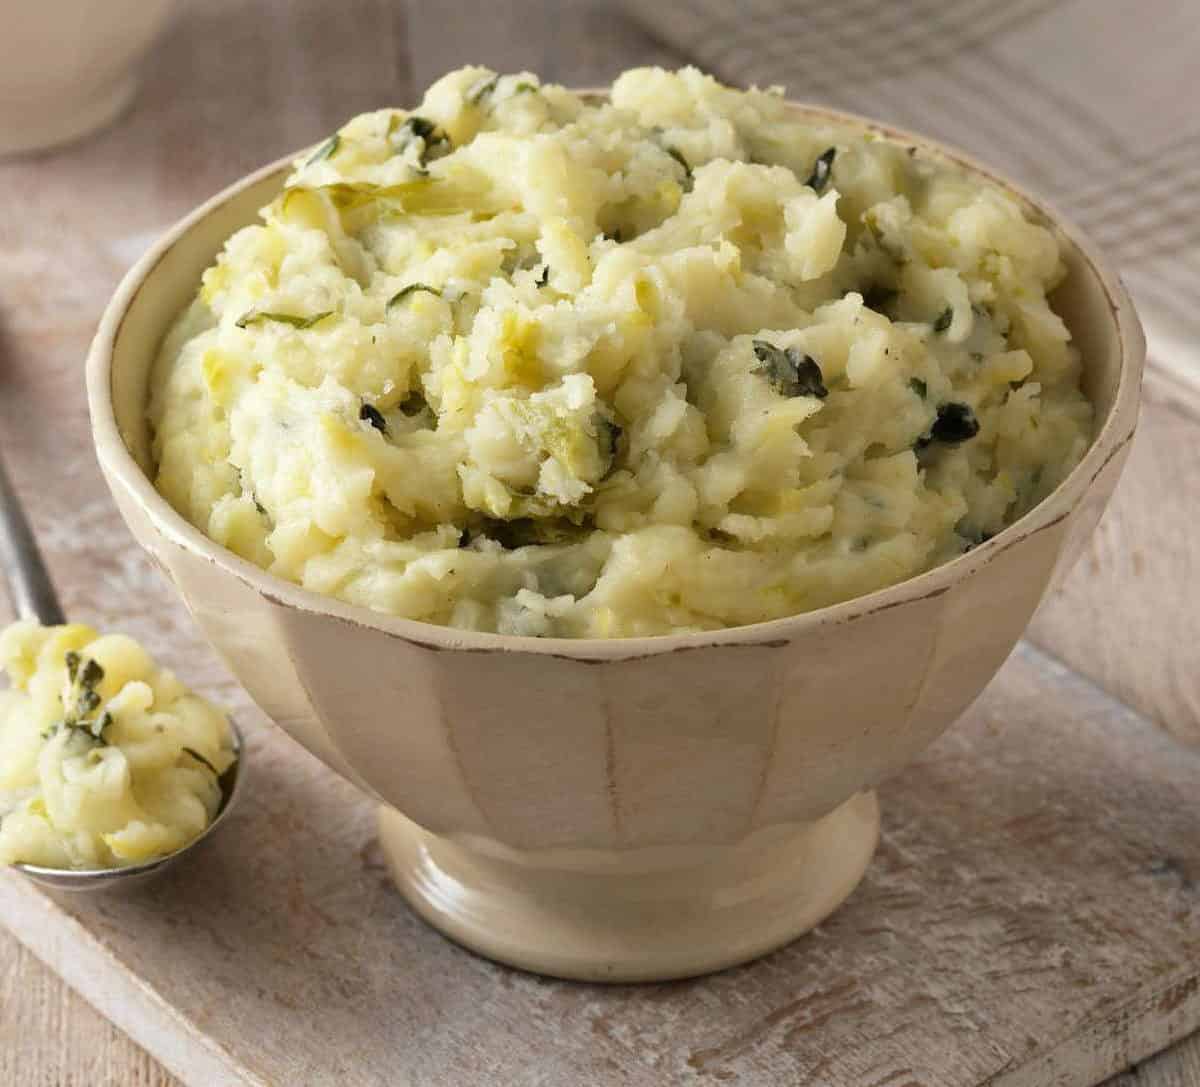  Proudly presenting our Irish Vegetarian Colcannon!